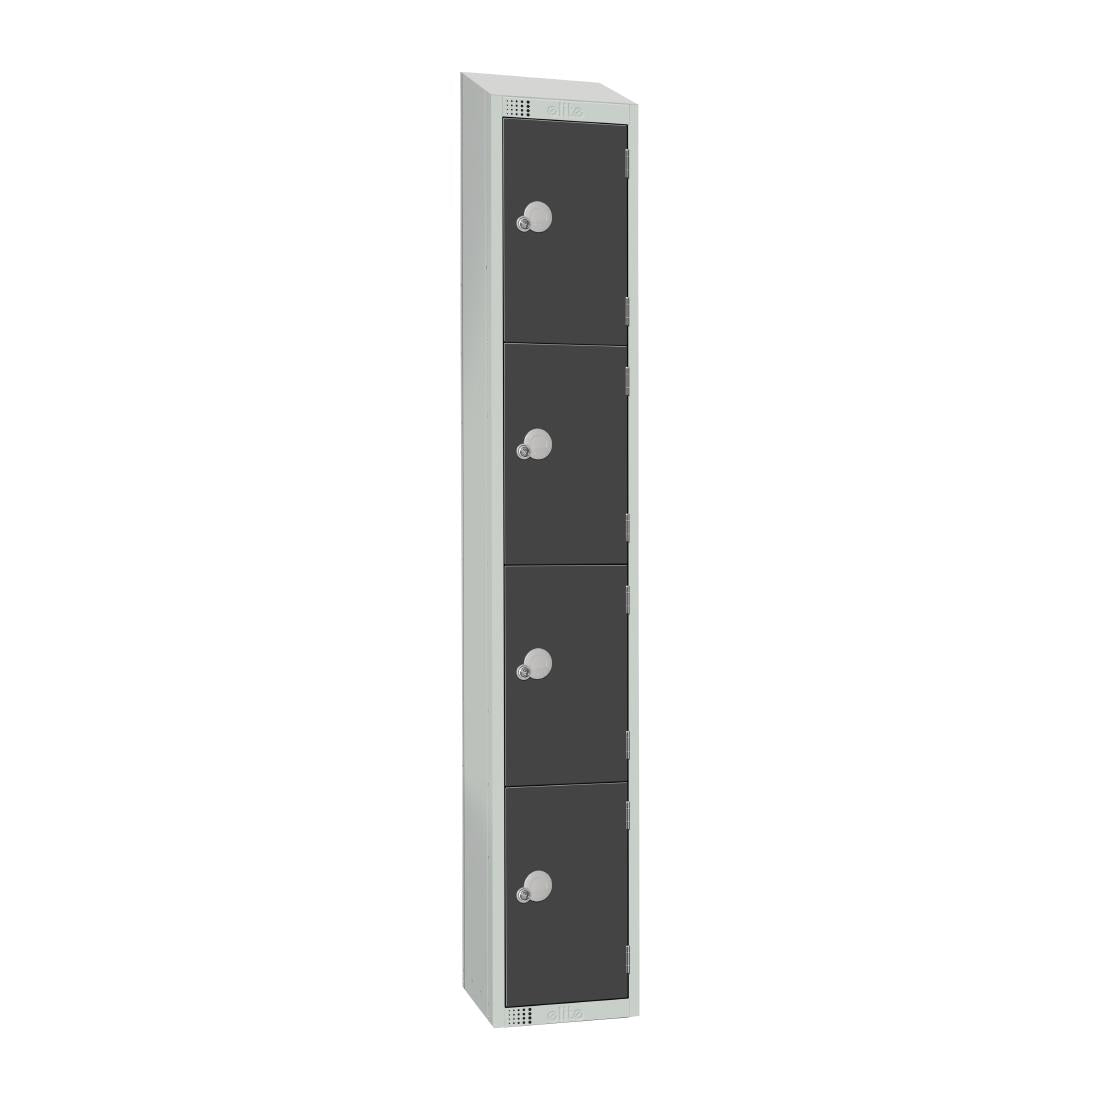 GR680-CNS Elite Four Door Coin Return Locker with Sloping Top Graphite Grey JD Catering Equipment Solutions Ltd